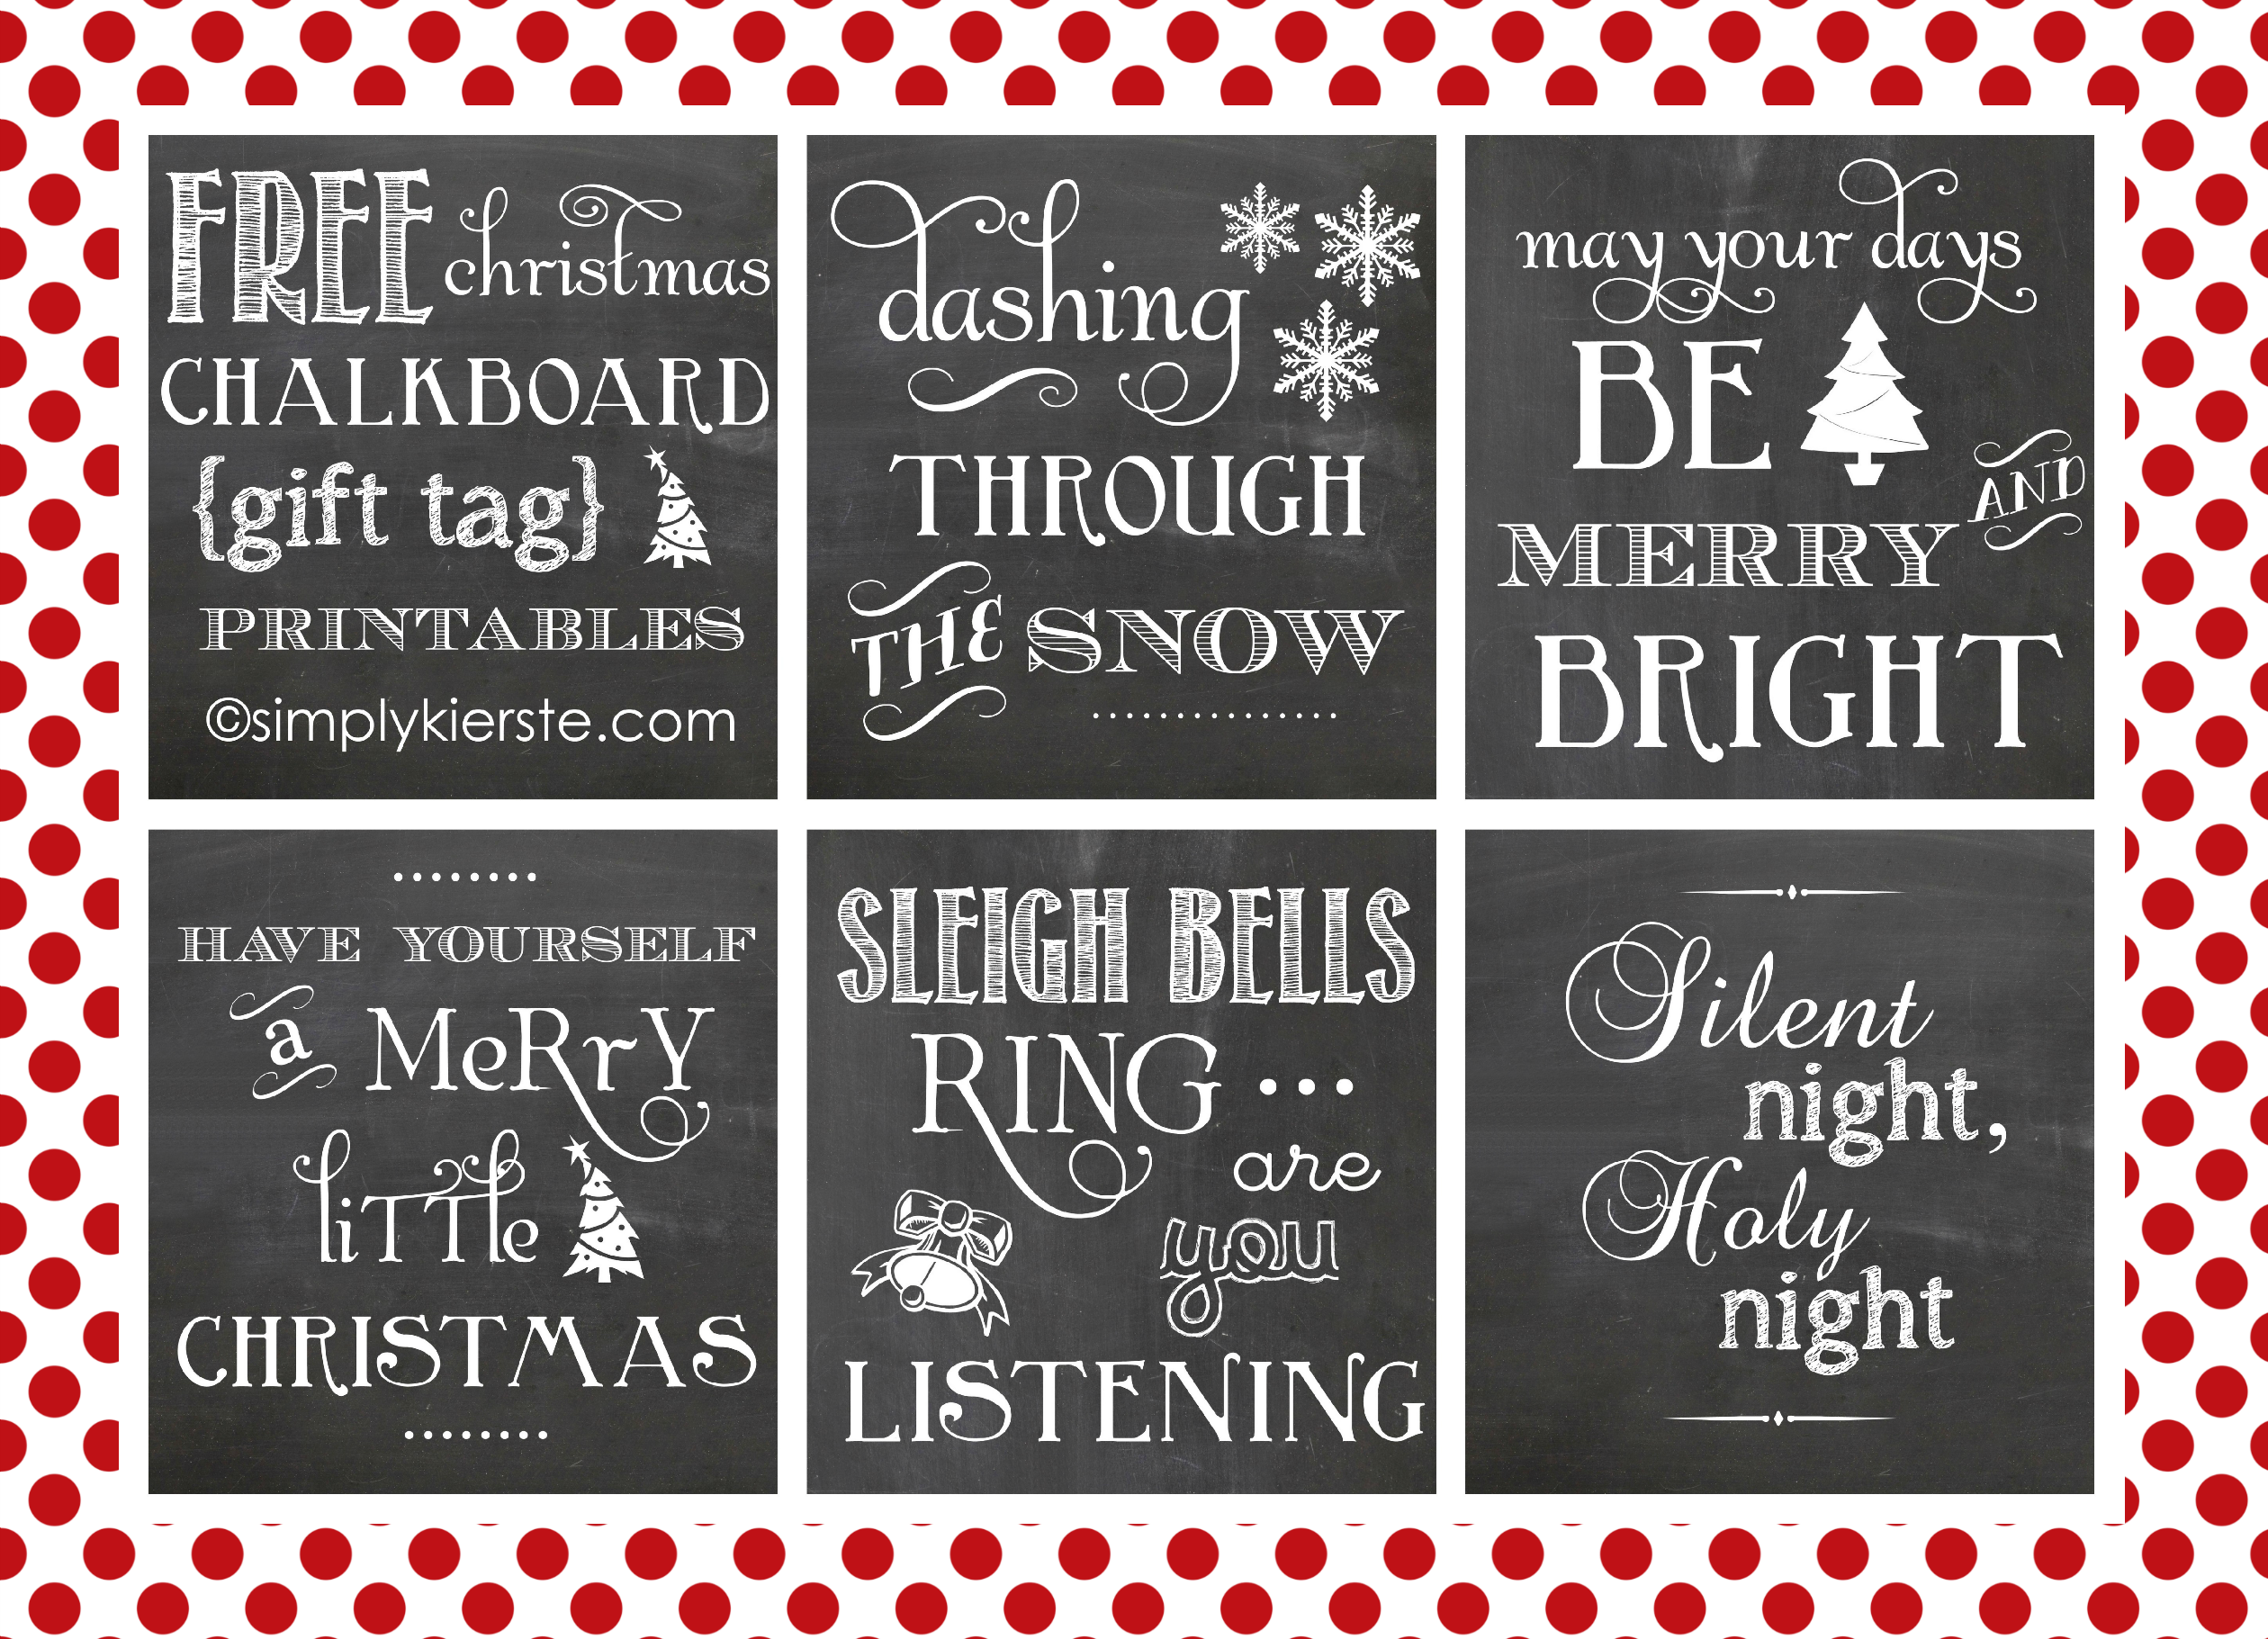 chalkboard-gift-tag-printables-from-simply-kierste